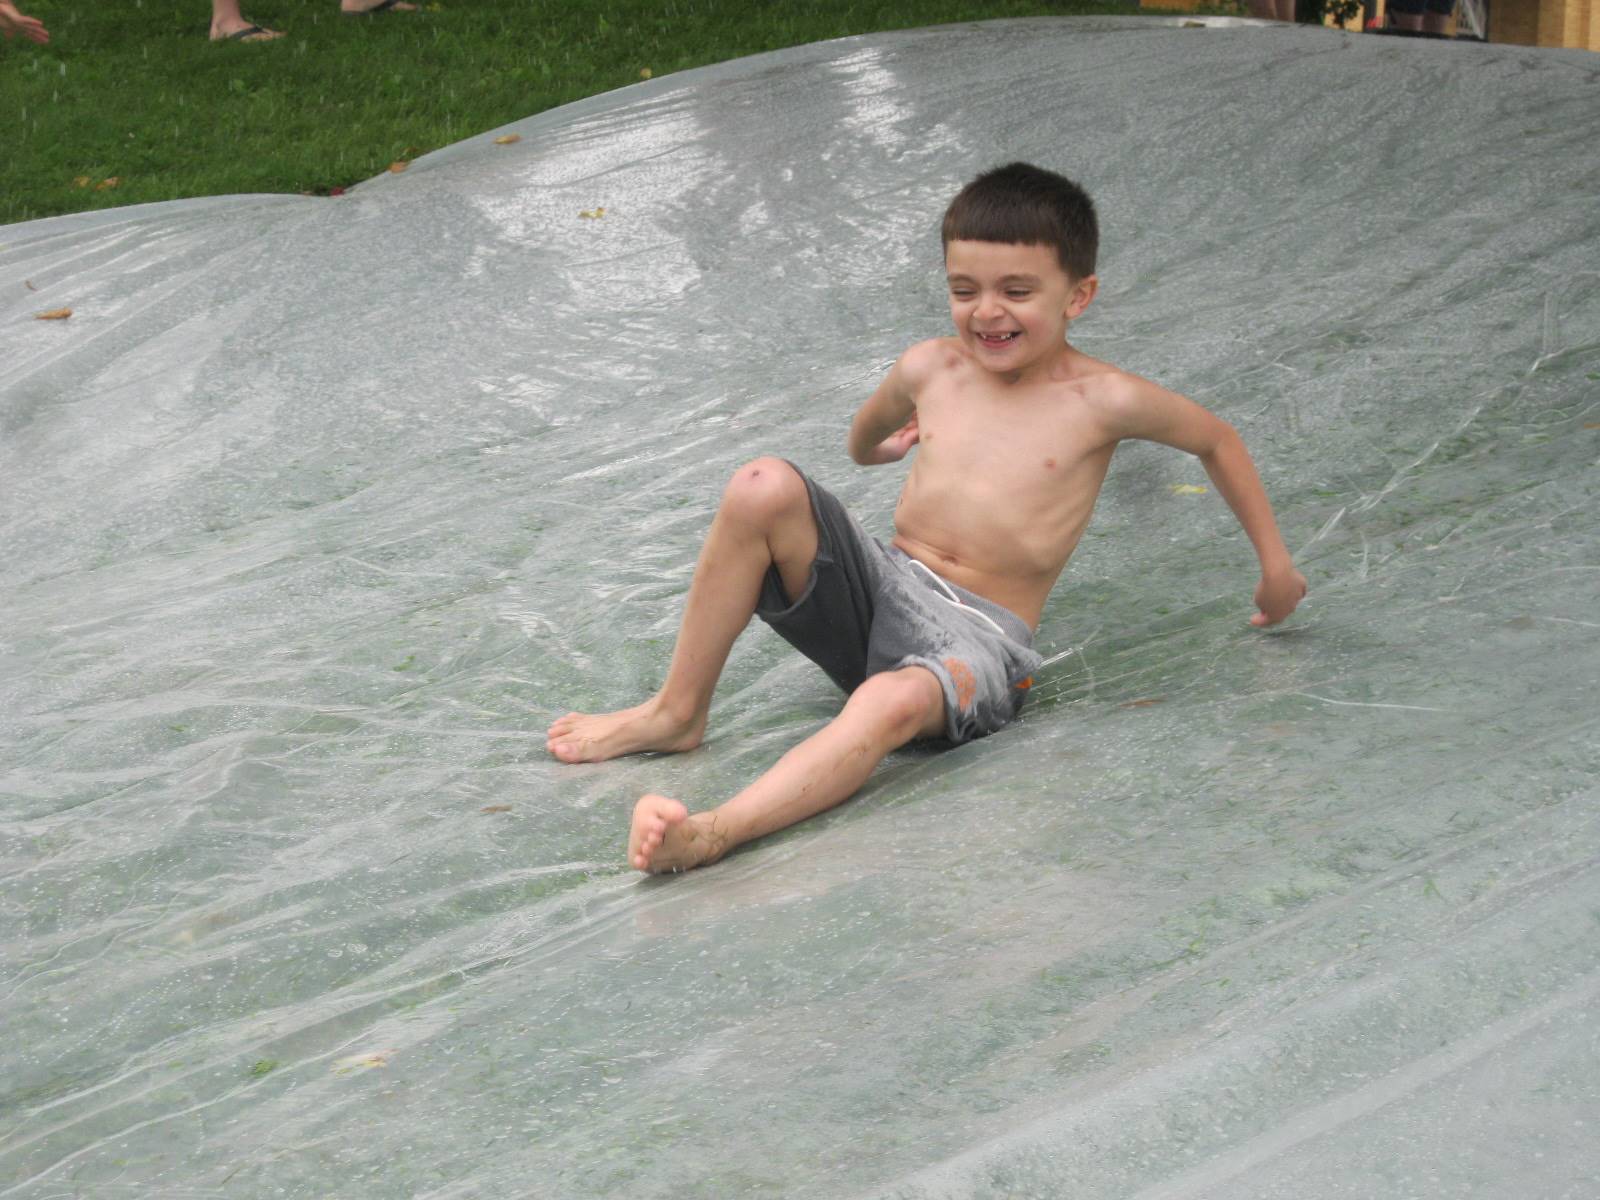 1 student on water slide